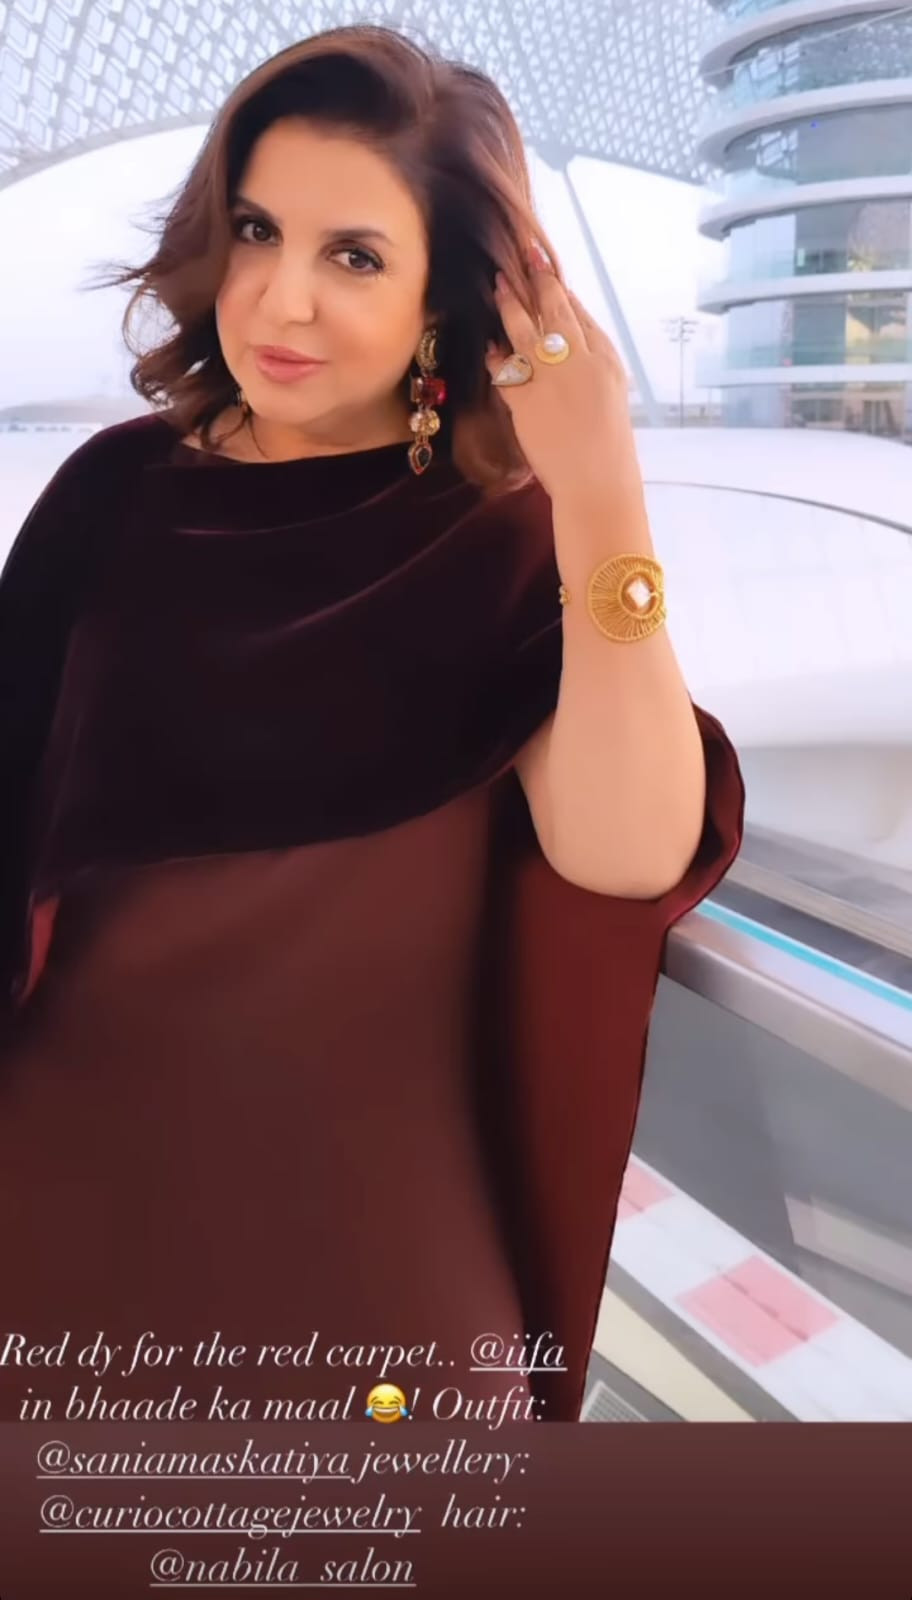 Farah Khan Kunder looking spectacular in this Amoh by JADE's Banarasi  kurta.Here is what she has to say about her look: 